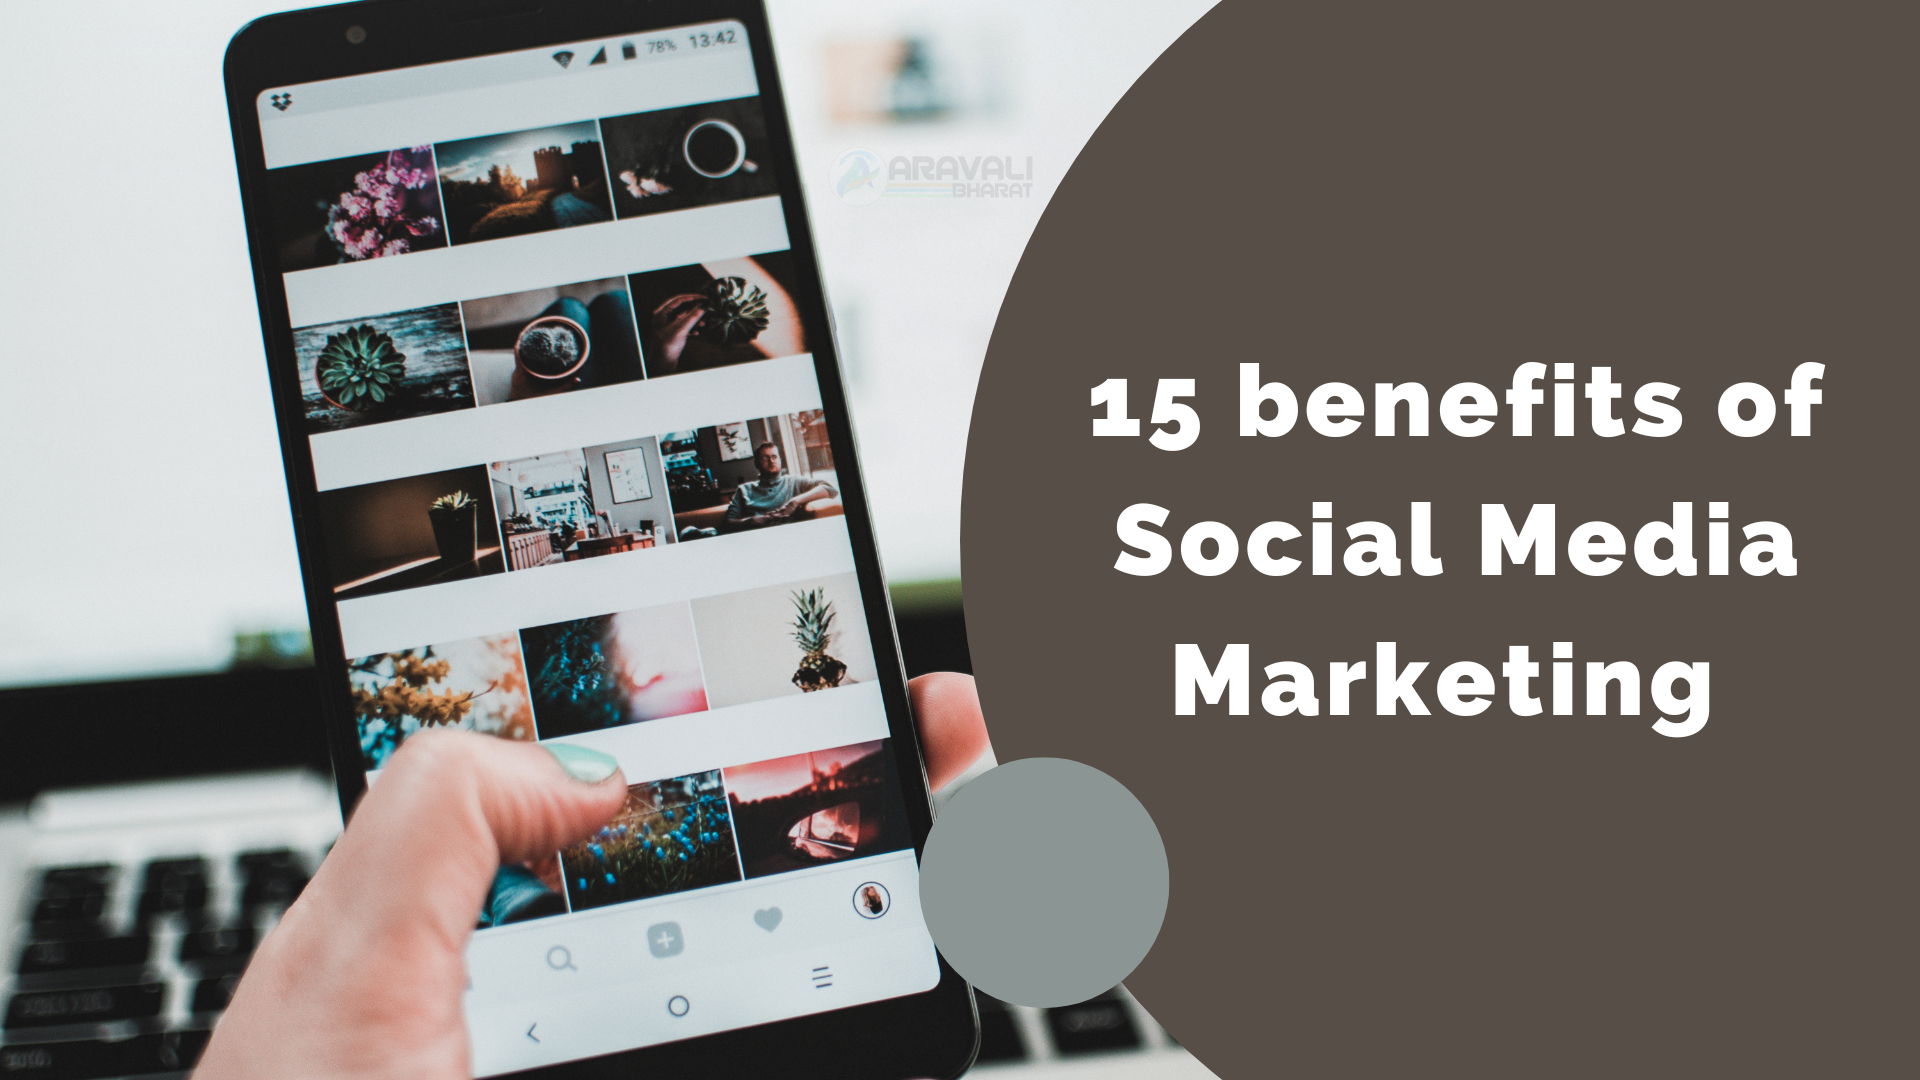 15 benefits of social media marketing to increase your business